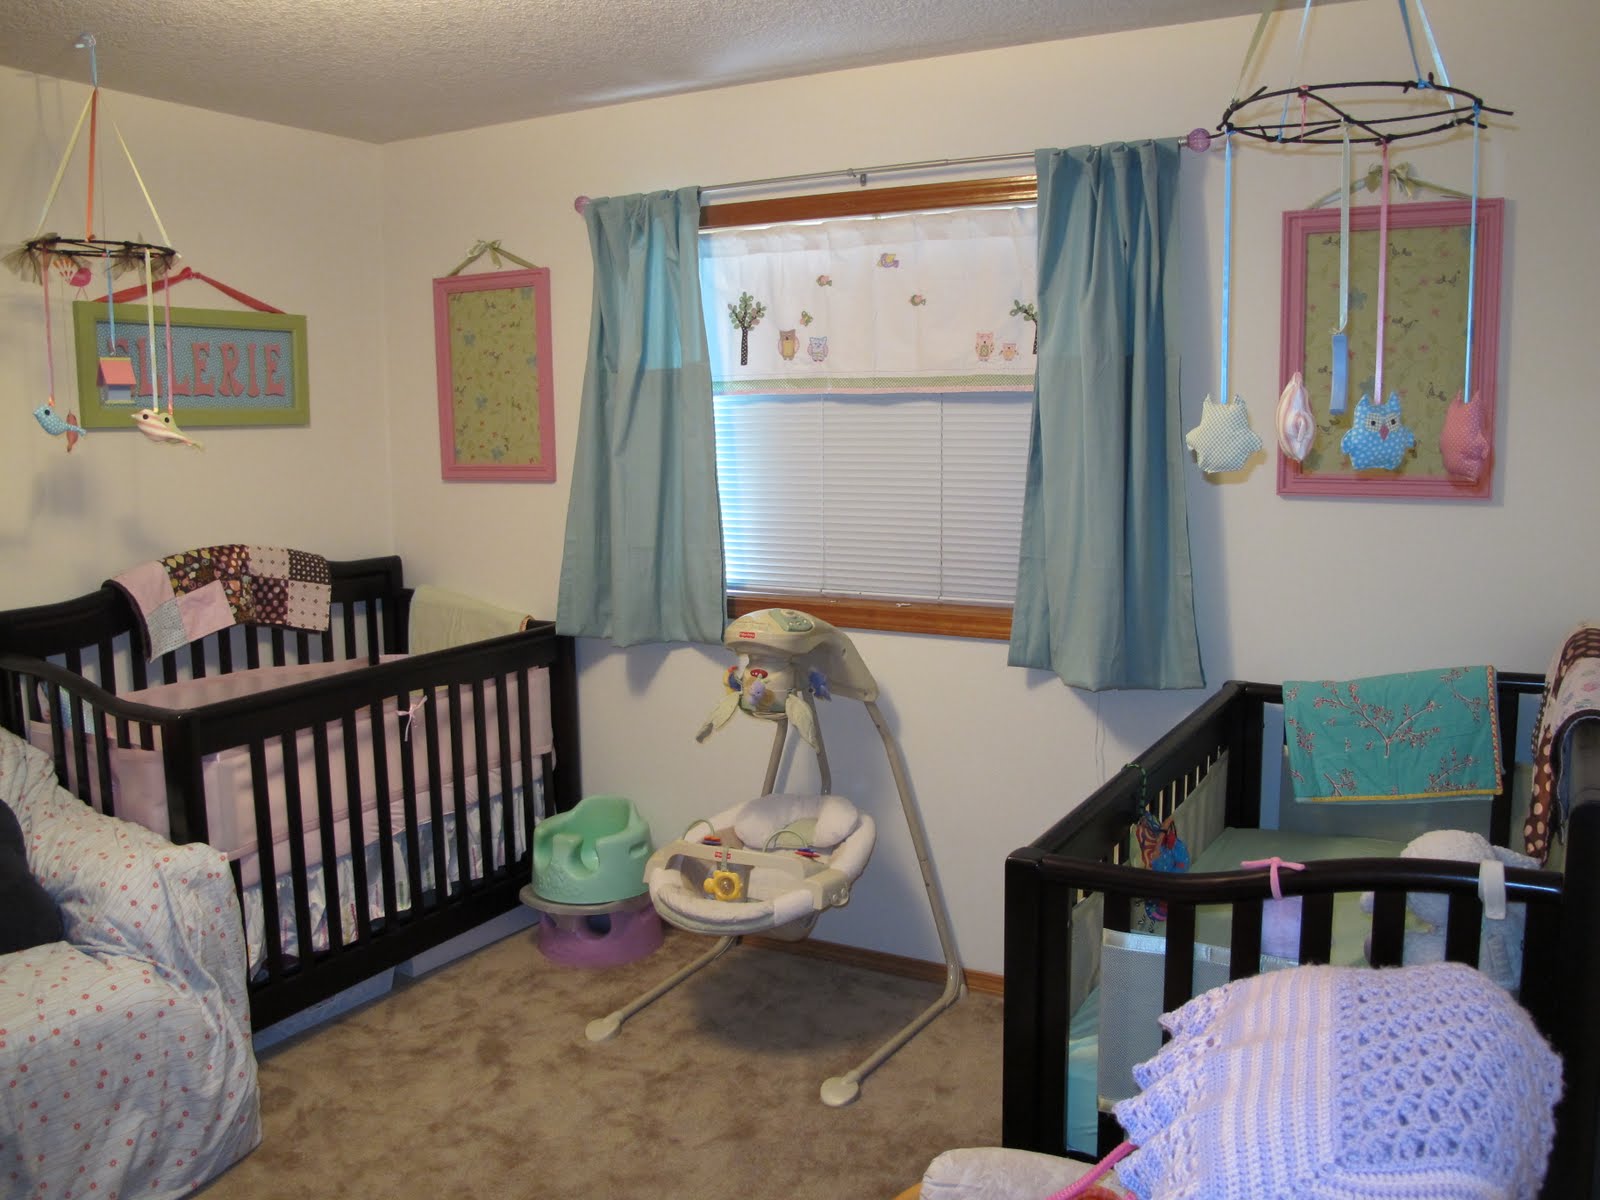 White Painted With Ordinary White Painted Nursery Interior With Black Painted Best Baby Cribs For Twins With Blue Pink And Green Splash Kids Room Marvelous Best Baby Cribs Designed In Twins Model For Small Room